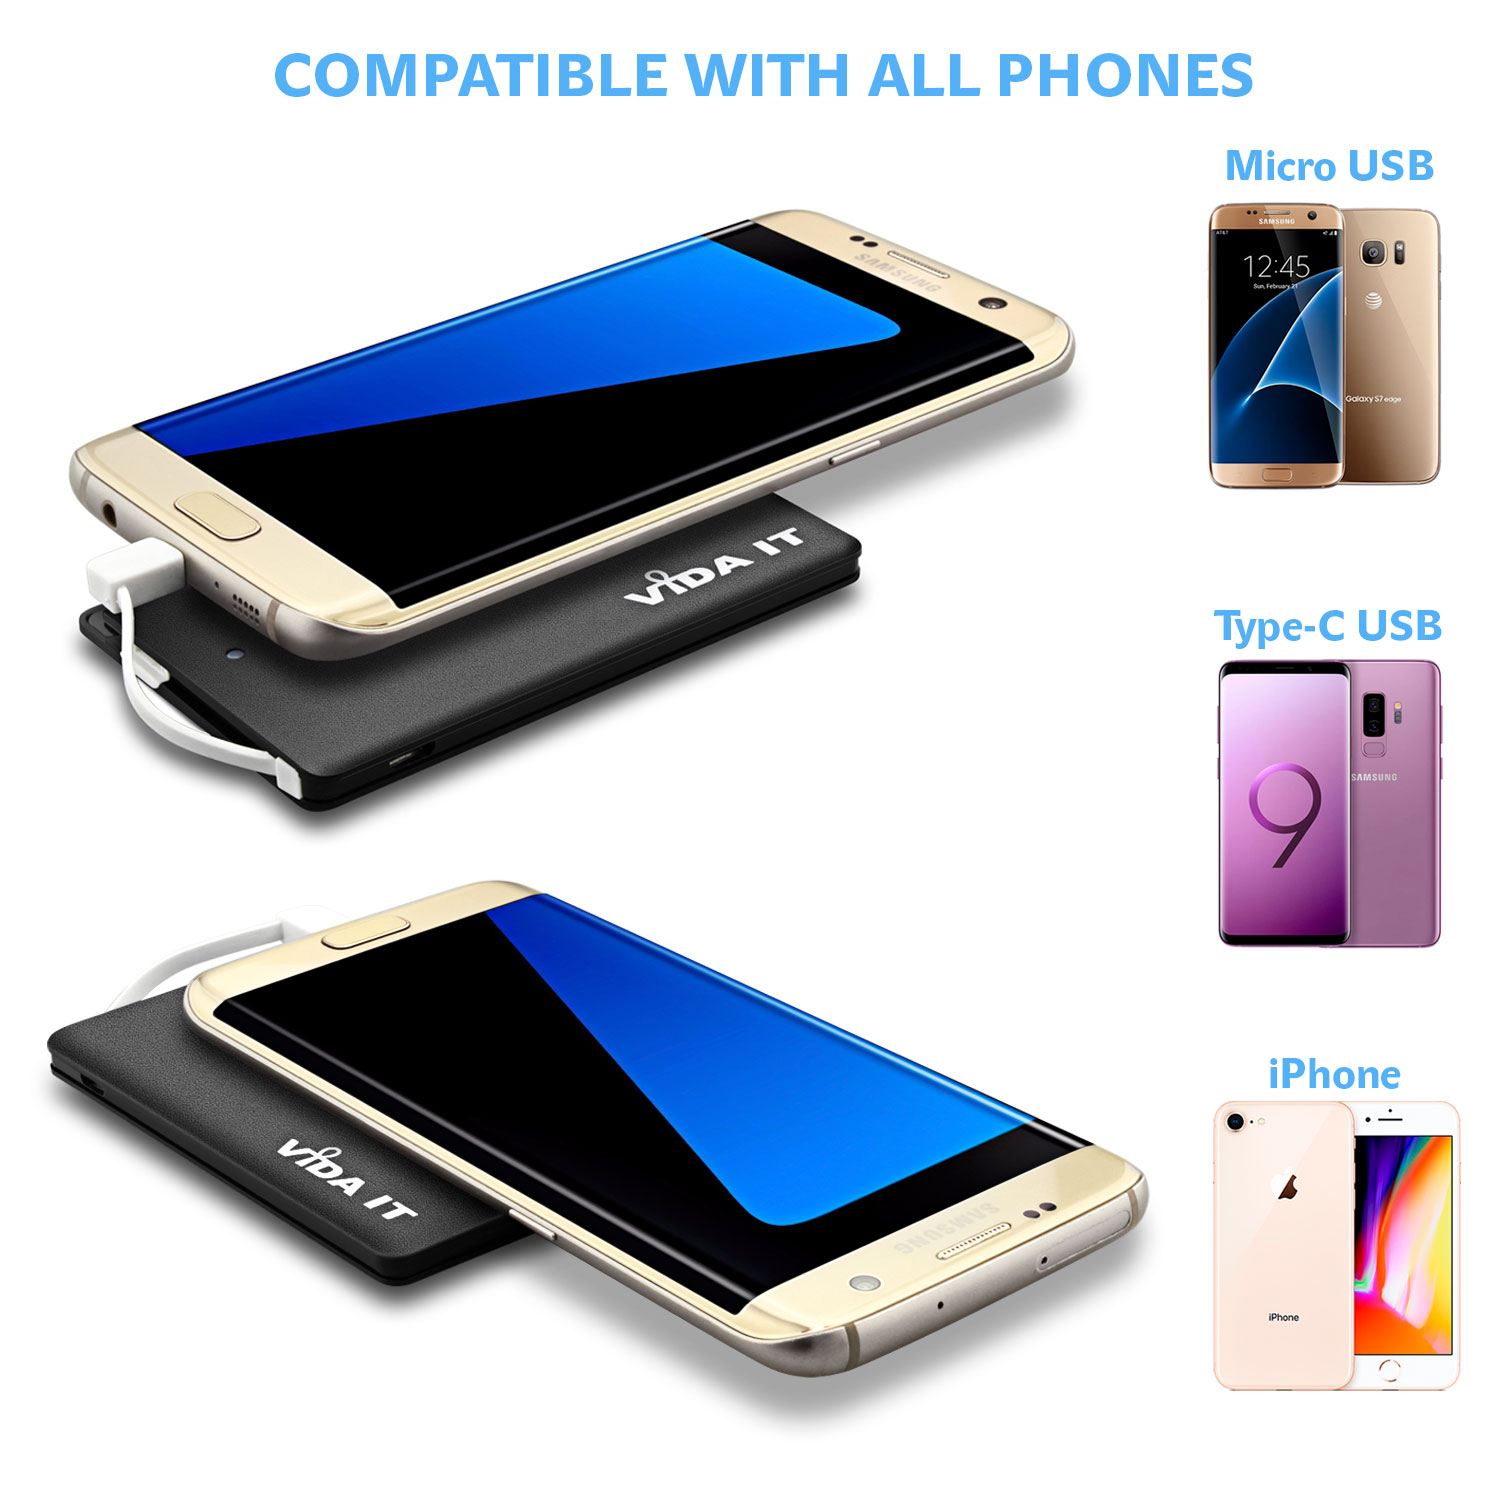 Slim credit card design Power Bank 2500mAh external battery pack thin portable USB charger with built-in micro-usb charging cable plus two adapters for iPhone Lightning and type-C usb-c connectors for mobile phone smartphone tablet pc